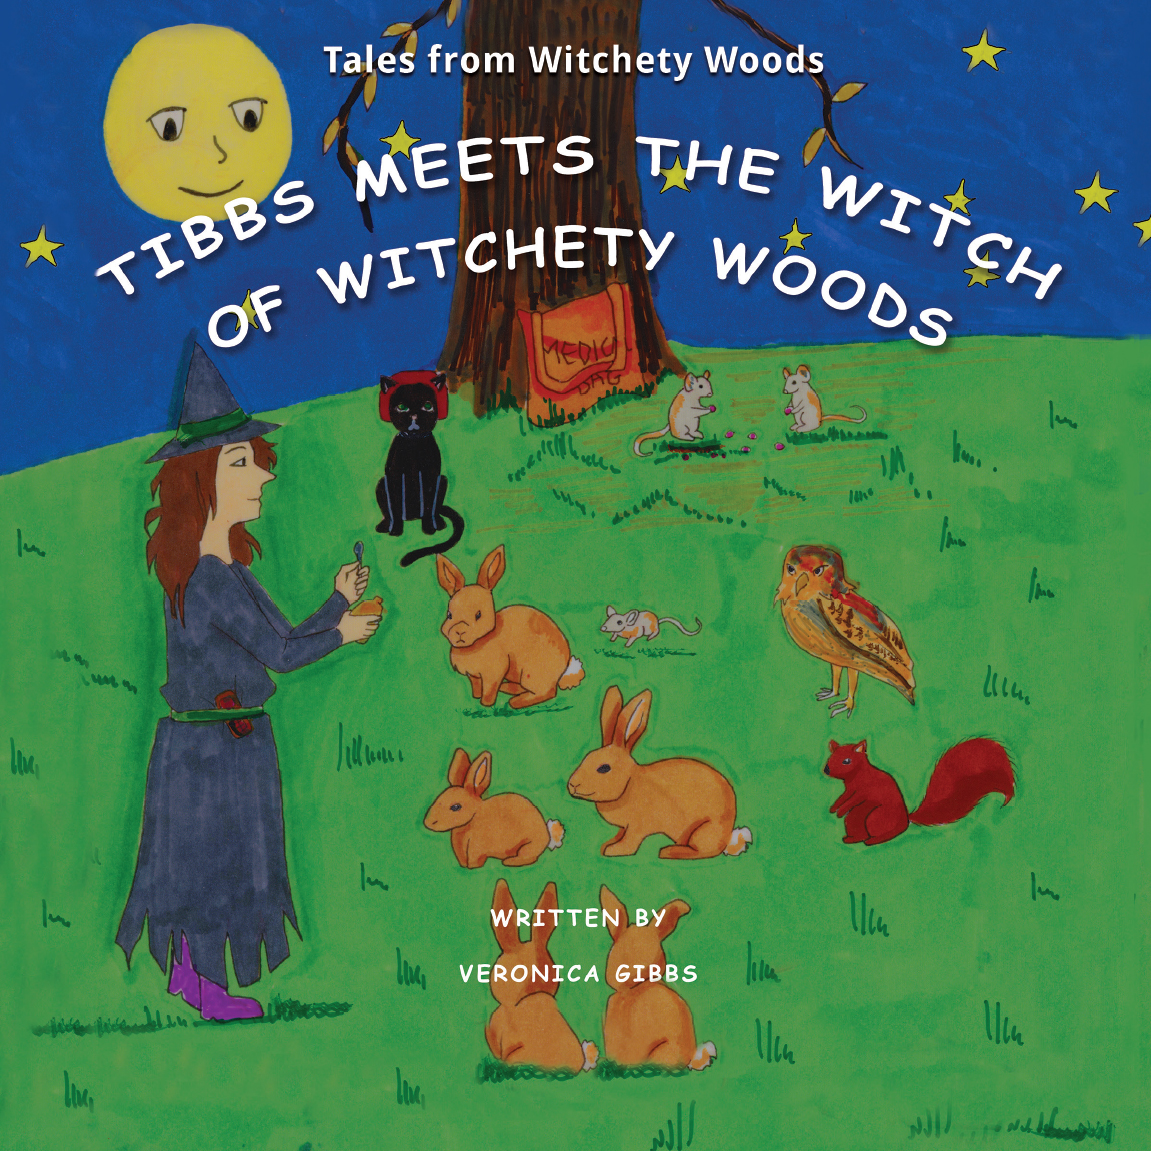 This image is the cover for the book Tibbs Meets The Witch of Witchety Woods